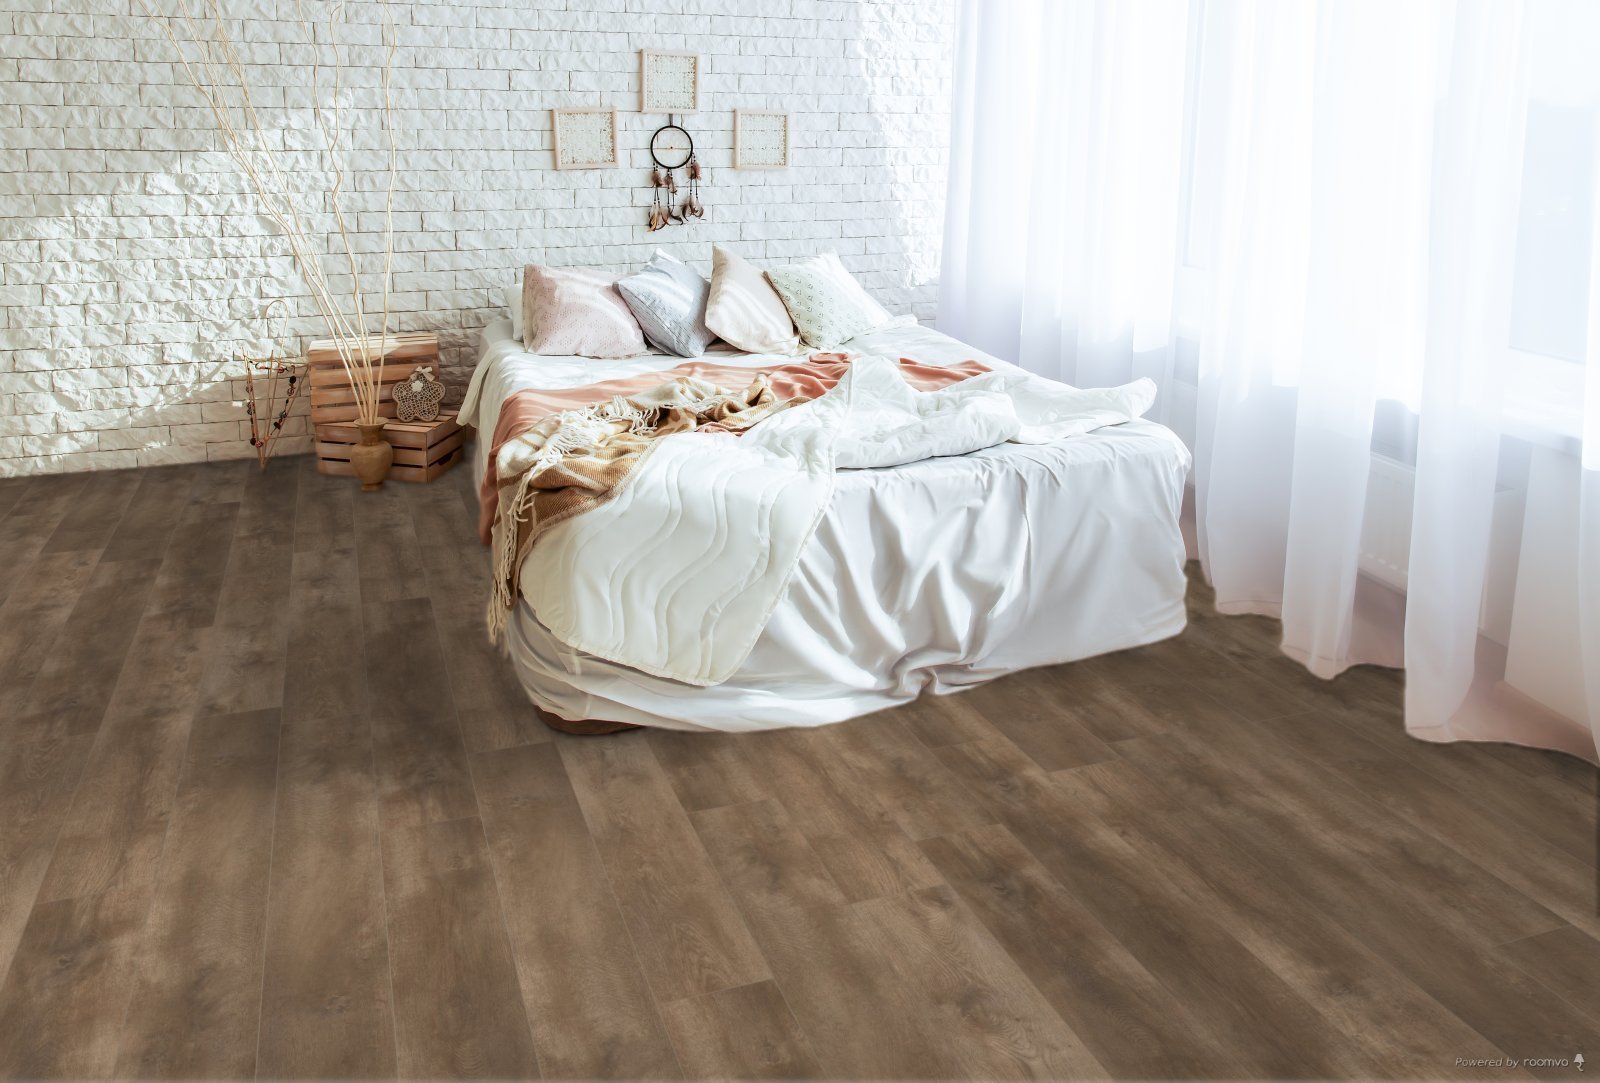 Horizen Flooring presents to you a picture of a quality wide plank Chopin luxury vinyl plank. NovoCore Q XXL Tango collection features a wide range of colors & designs that will compliment any interior. Natural wood grain synchronized surface allow for an authentic hardwood look & feel. This collection features a 0.3″ / 7.5 mm overall thickness and a durable 22 mil / 0.55 mm wear layer for residential and commercial applications.